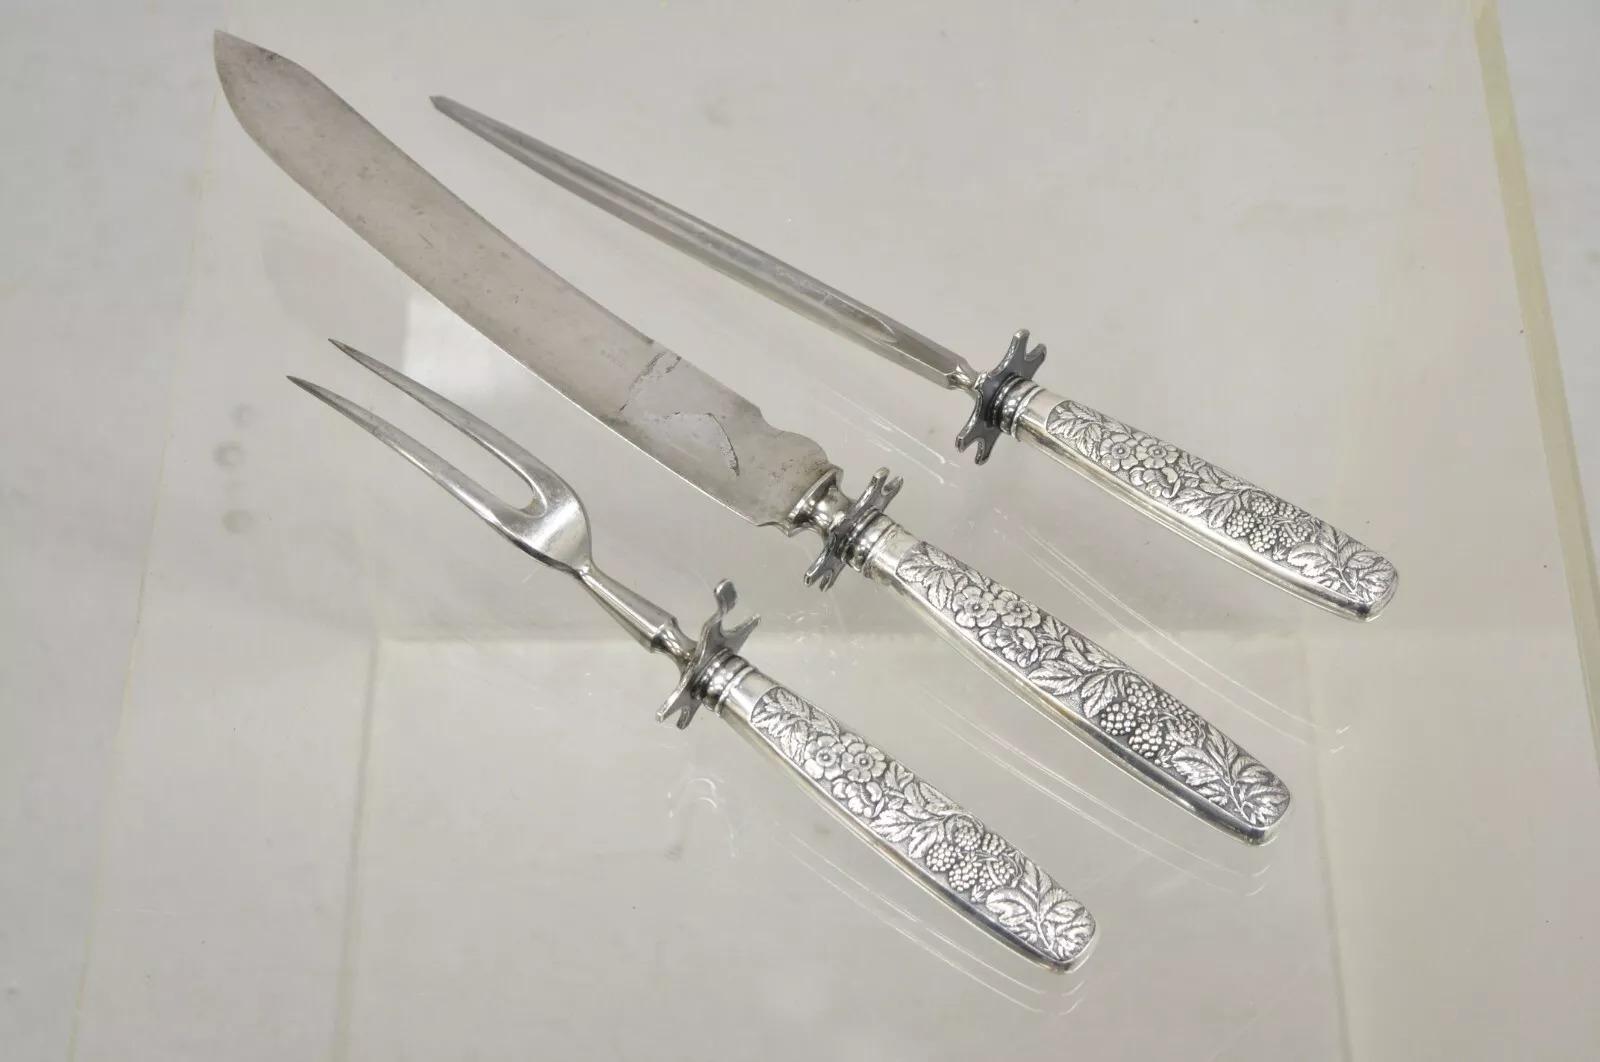 Antique R Wallace & Sons Victorian Silver Plated Repousse Meat Carving Set - 3Pc For Sale 7